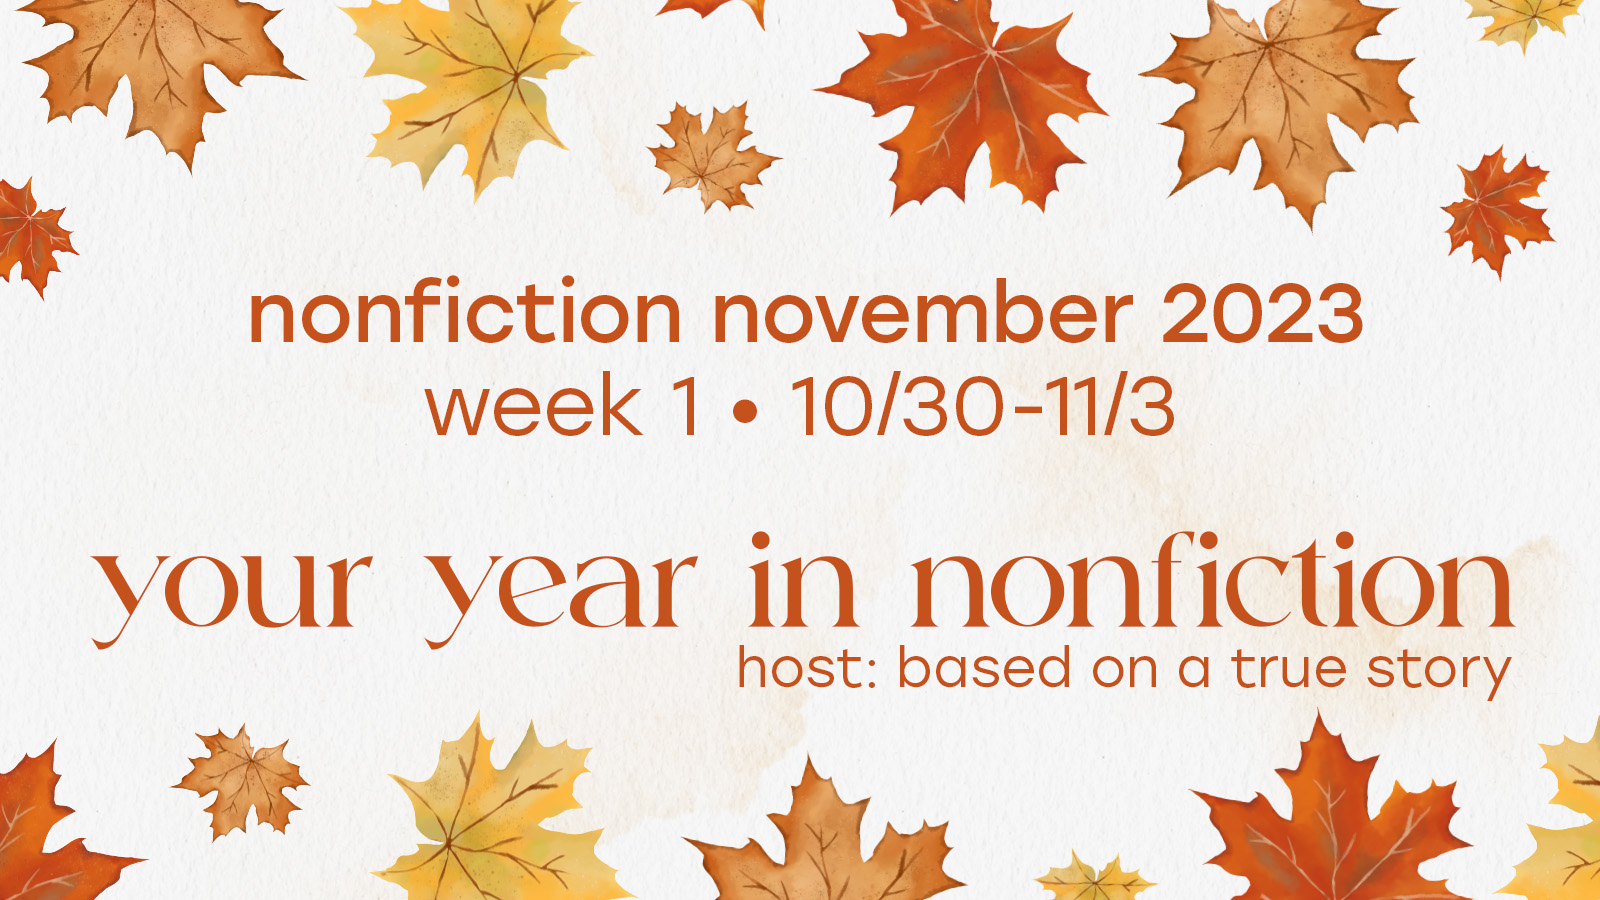 Nonfiction November #nonficnov23 Week One – Your Year in Nonfiction